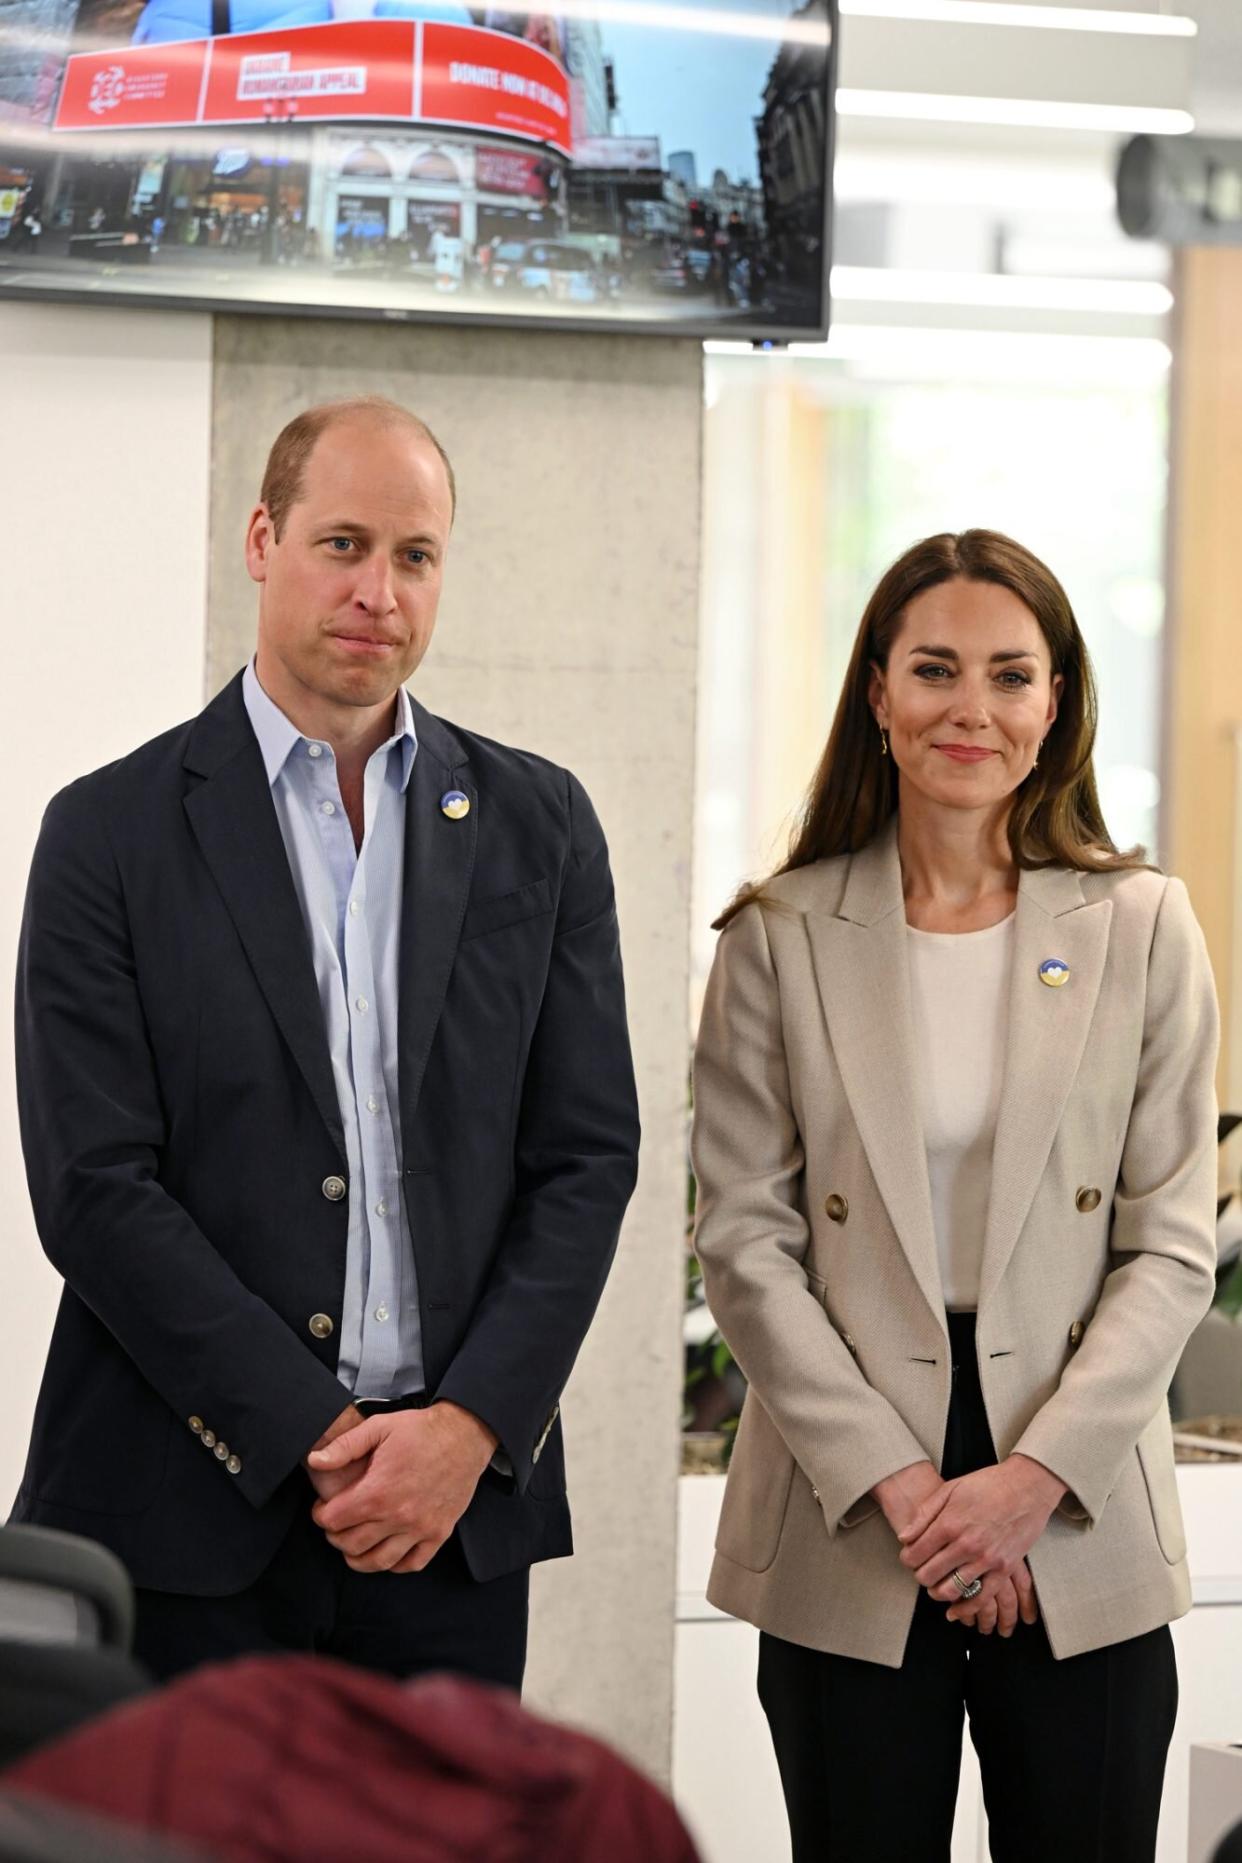 Prince William, Duke of Cambridge and Catherine, Duchess of Cambridge tour the facilities during a visit at the London headquarters of the Disasters Emergency Committee (DEC)